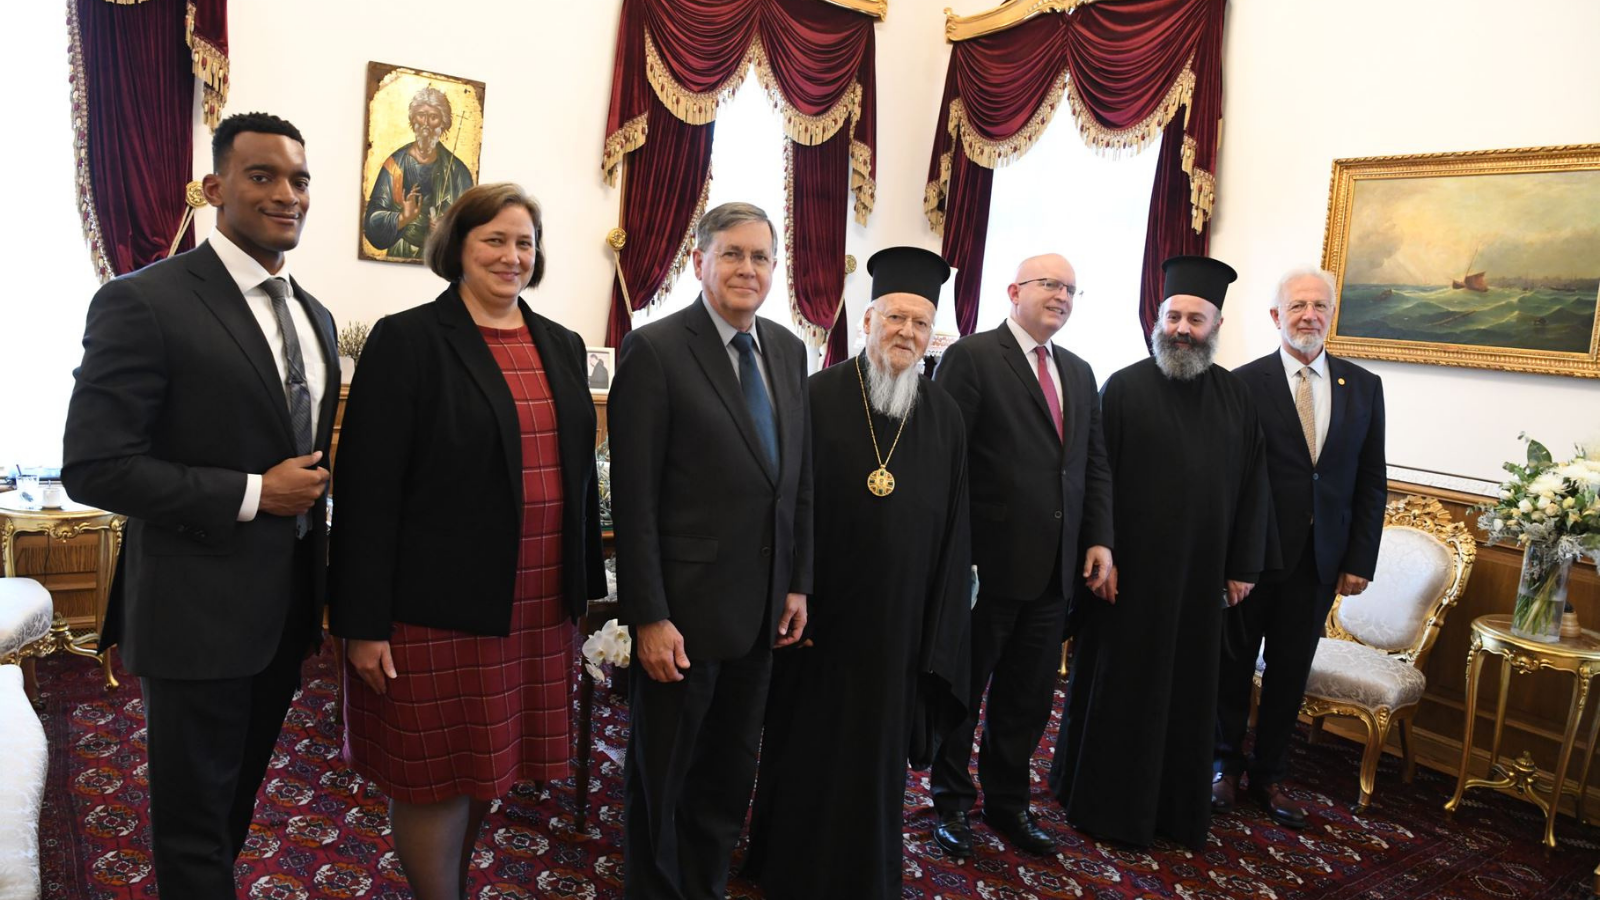 Kevin Moss served as note taker during high level visits for Ambassador David Satterfield, Acting Assistant Secretary for European and Eurasian Affairs Philip Reeker, and Consul General Daria Darnell in meeting with His All-Holiness Ecumenical Patriarch Bartholomew I in October 2020 in Istanbul, Turkey. (Photo courtesy of Kevin Moss)